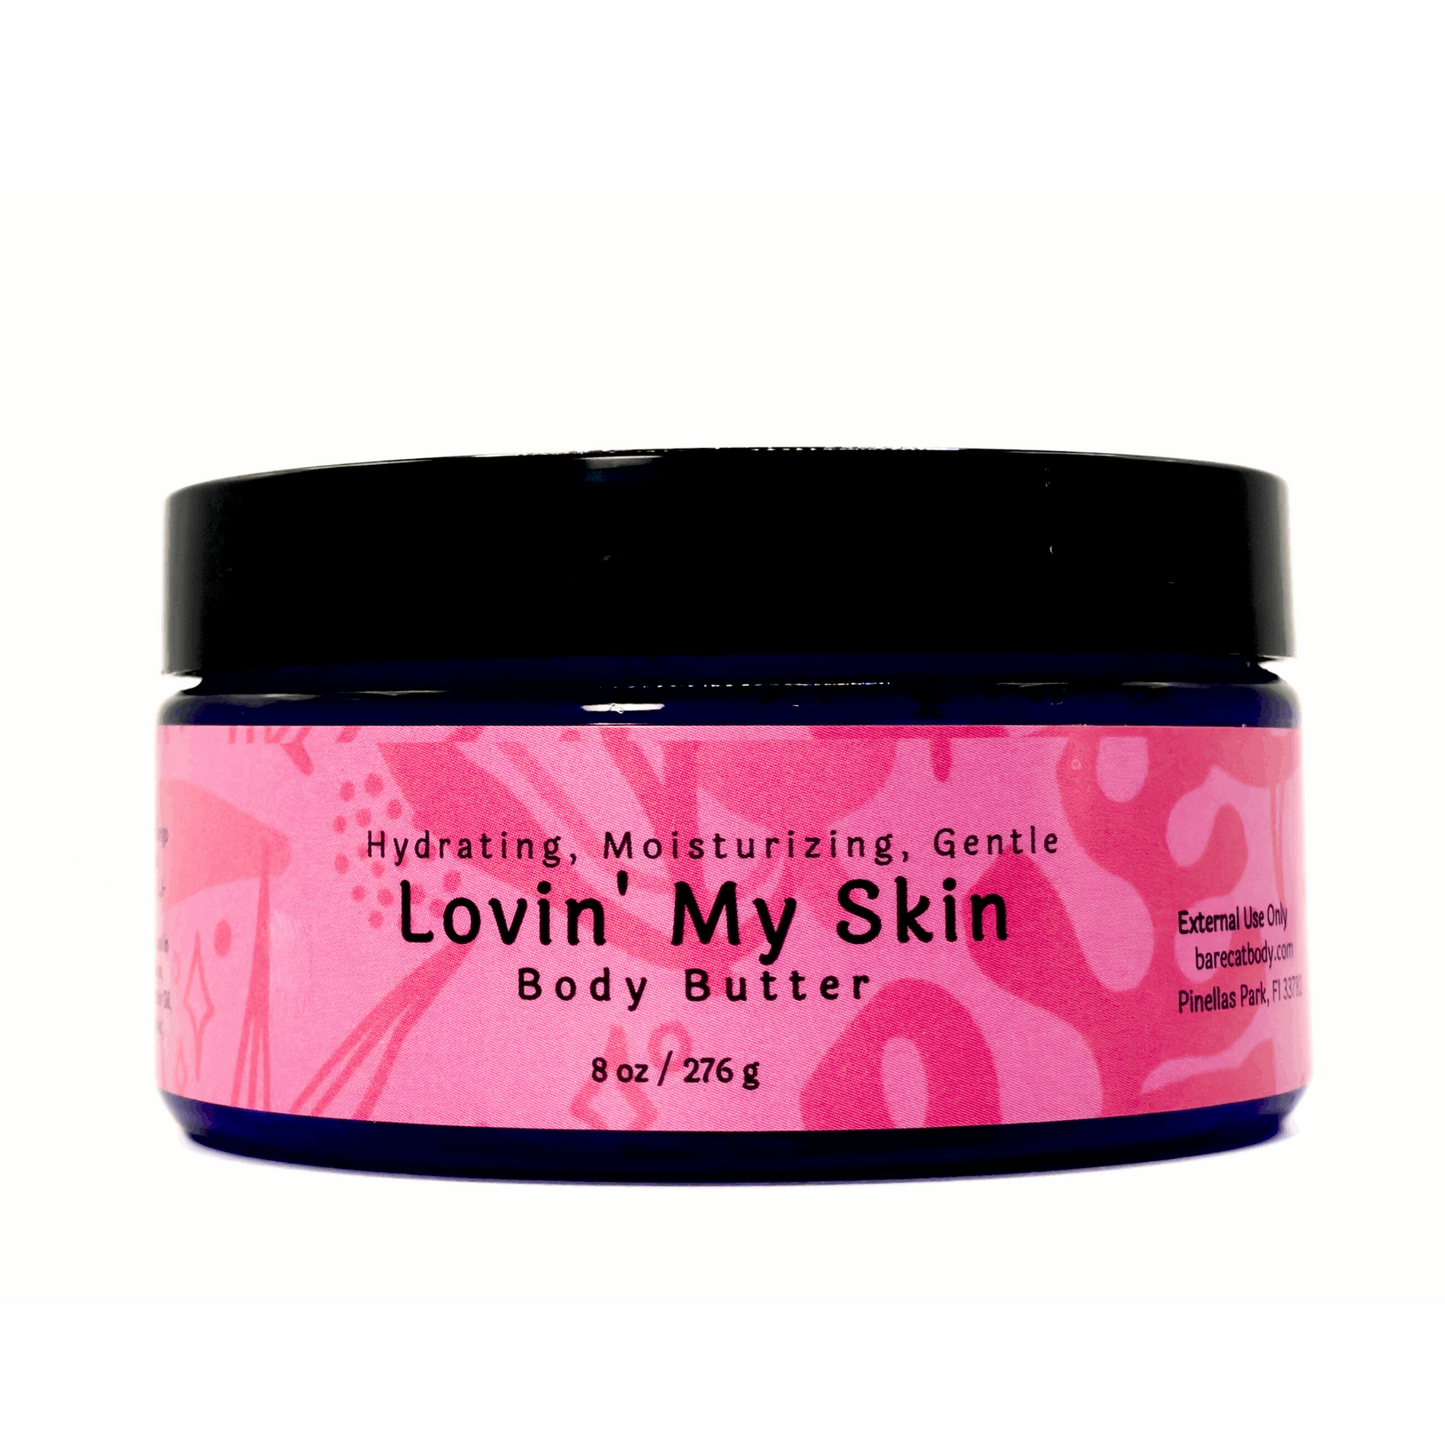 Container of Lovin’ My Skin Gentle Body Butter displaying its rich and creamy texture.